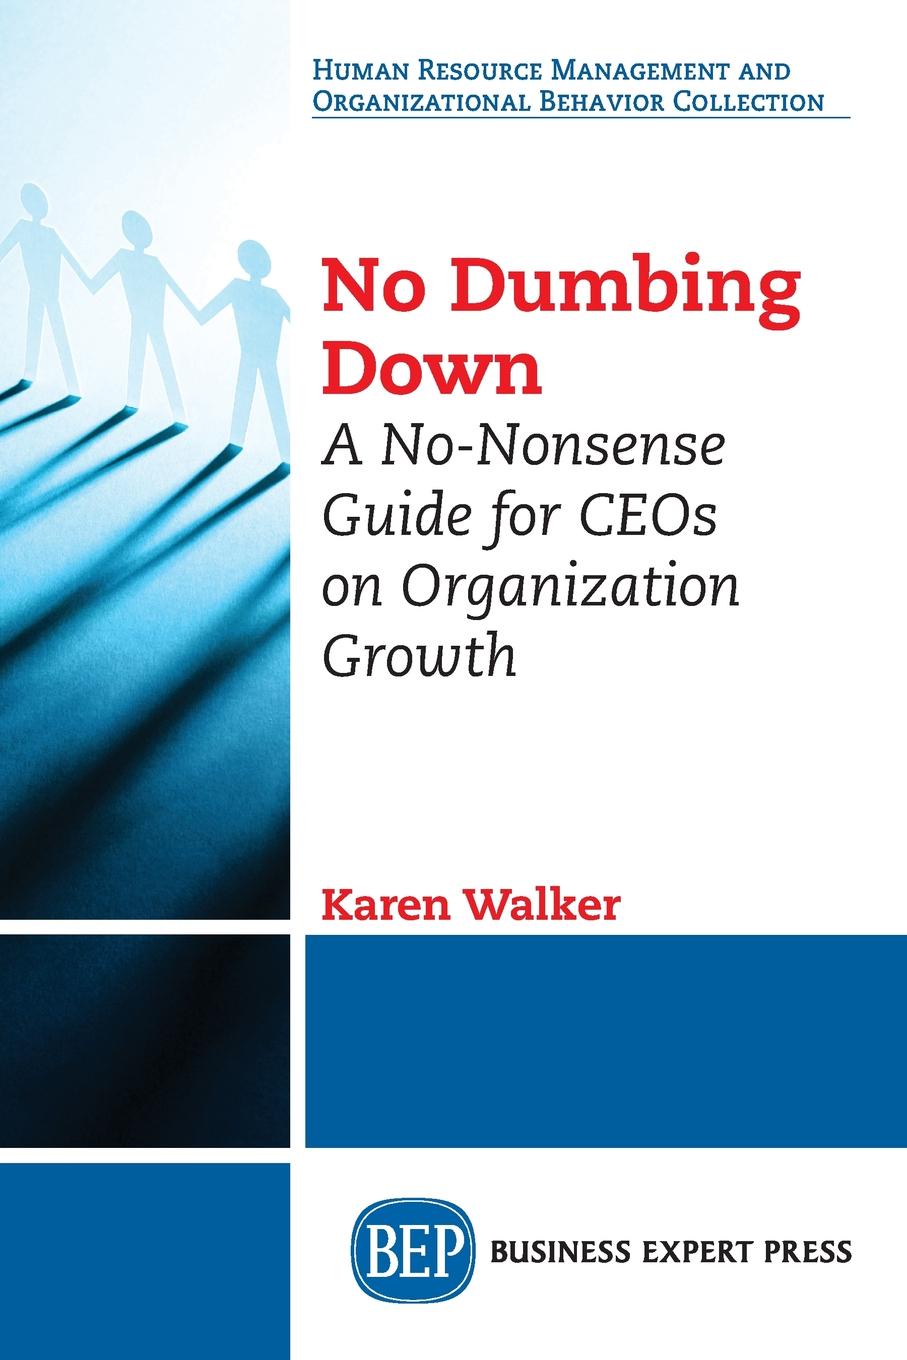 No Dumbing Down. A No-Nonsense Guide for CEOs on Organization Growth